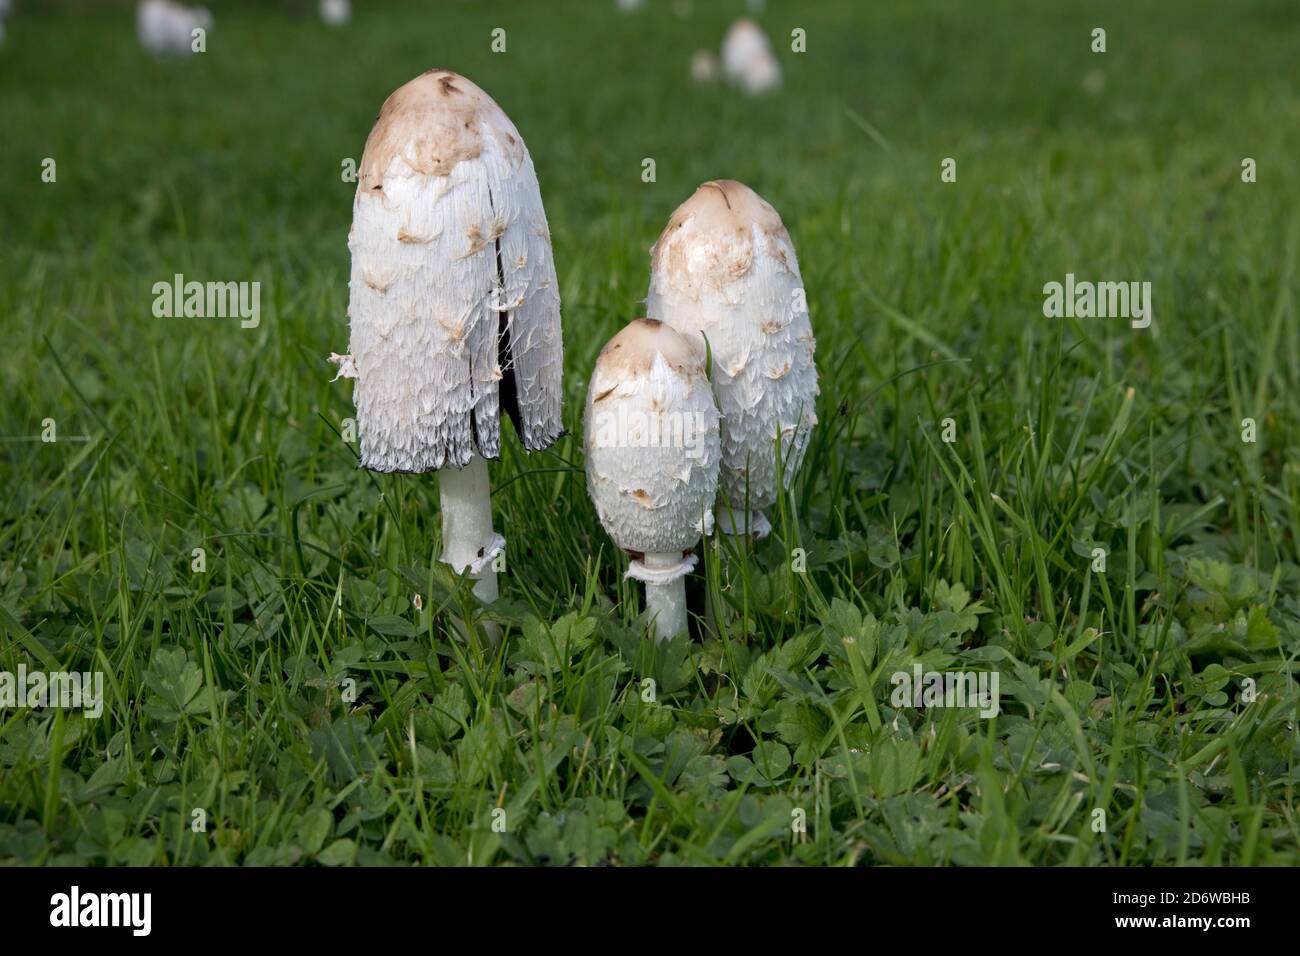 Shaggy Inkcap fungi Coprinus comatus at later stage in meadow Cotswolds UK Also known as Judges wig or Lawyers wig and as it matures it produces ink. Stock Photo